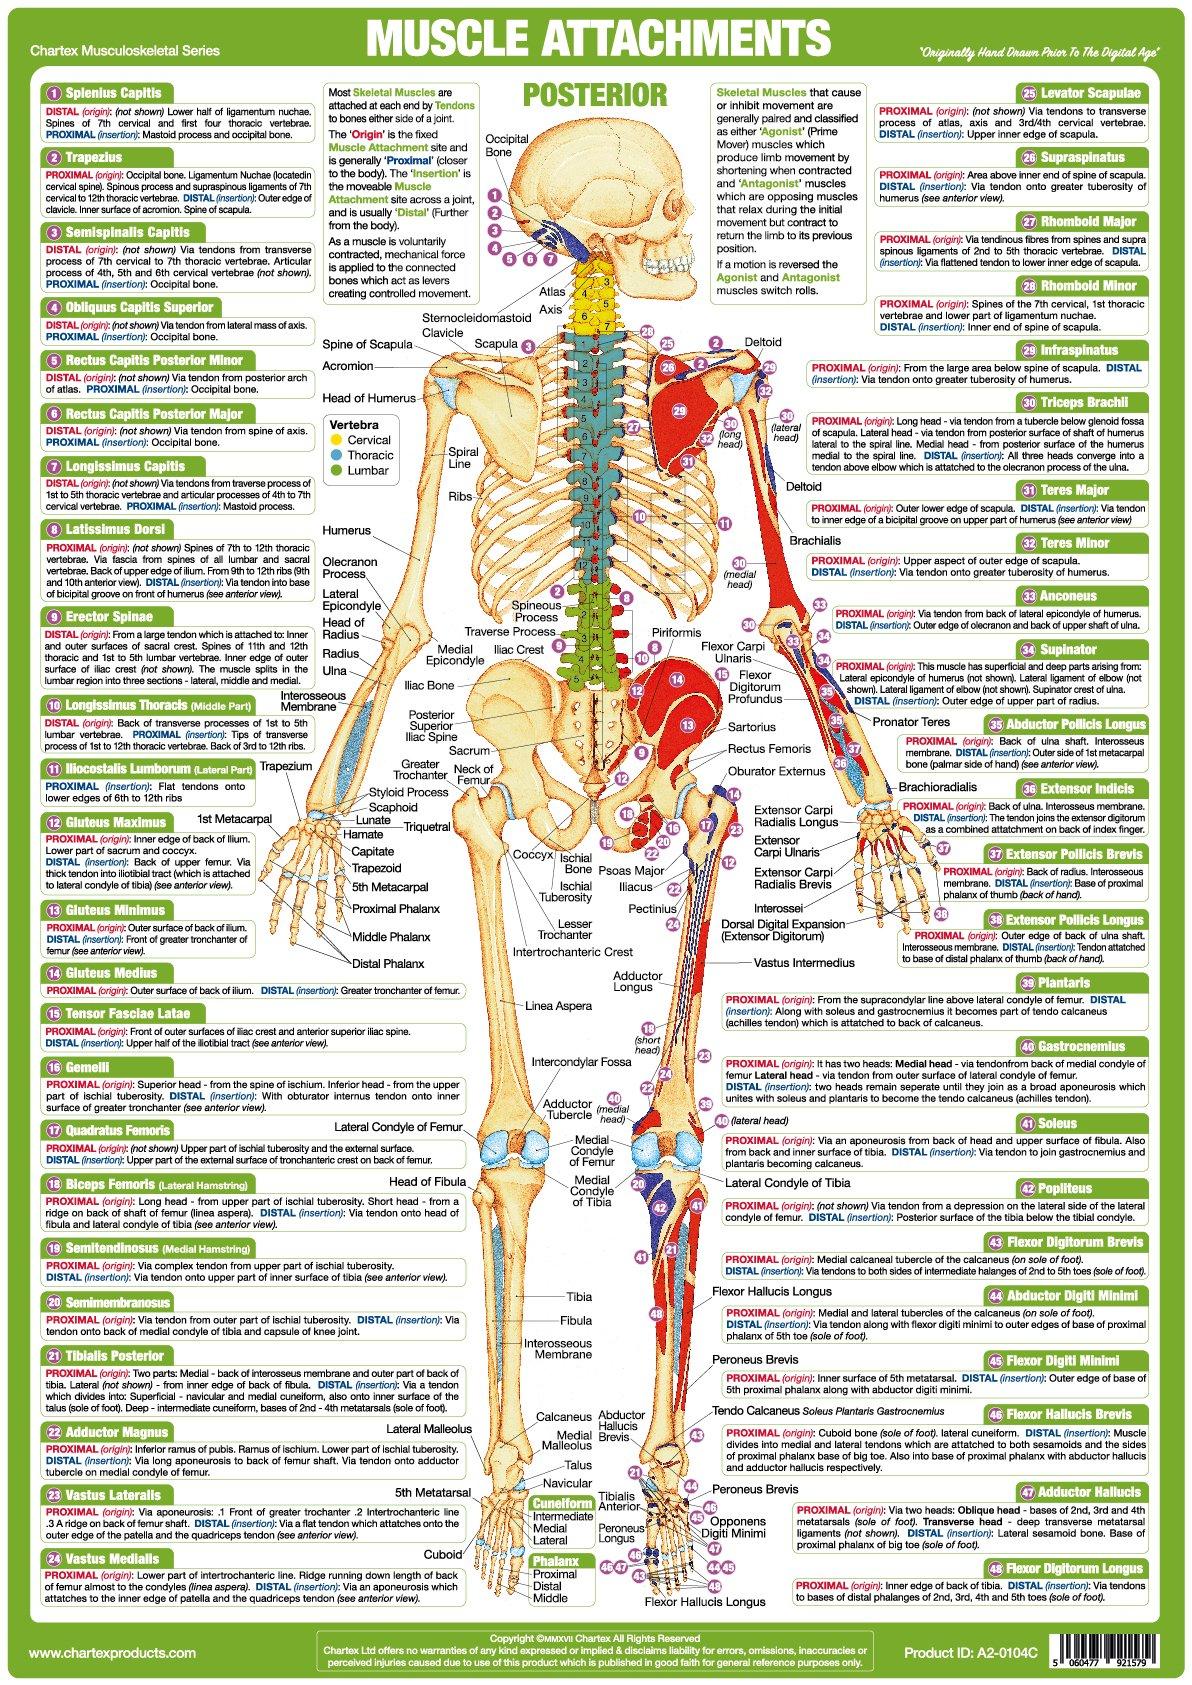 Muscle Attachments Anatomy Chart Posterior